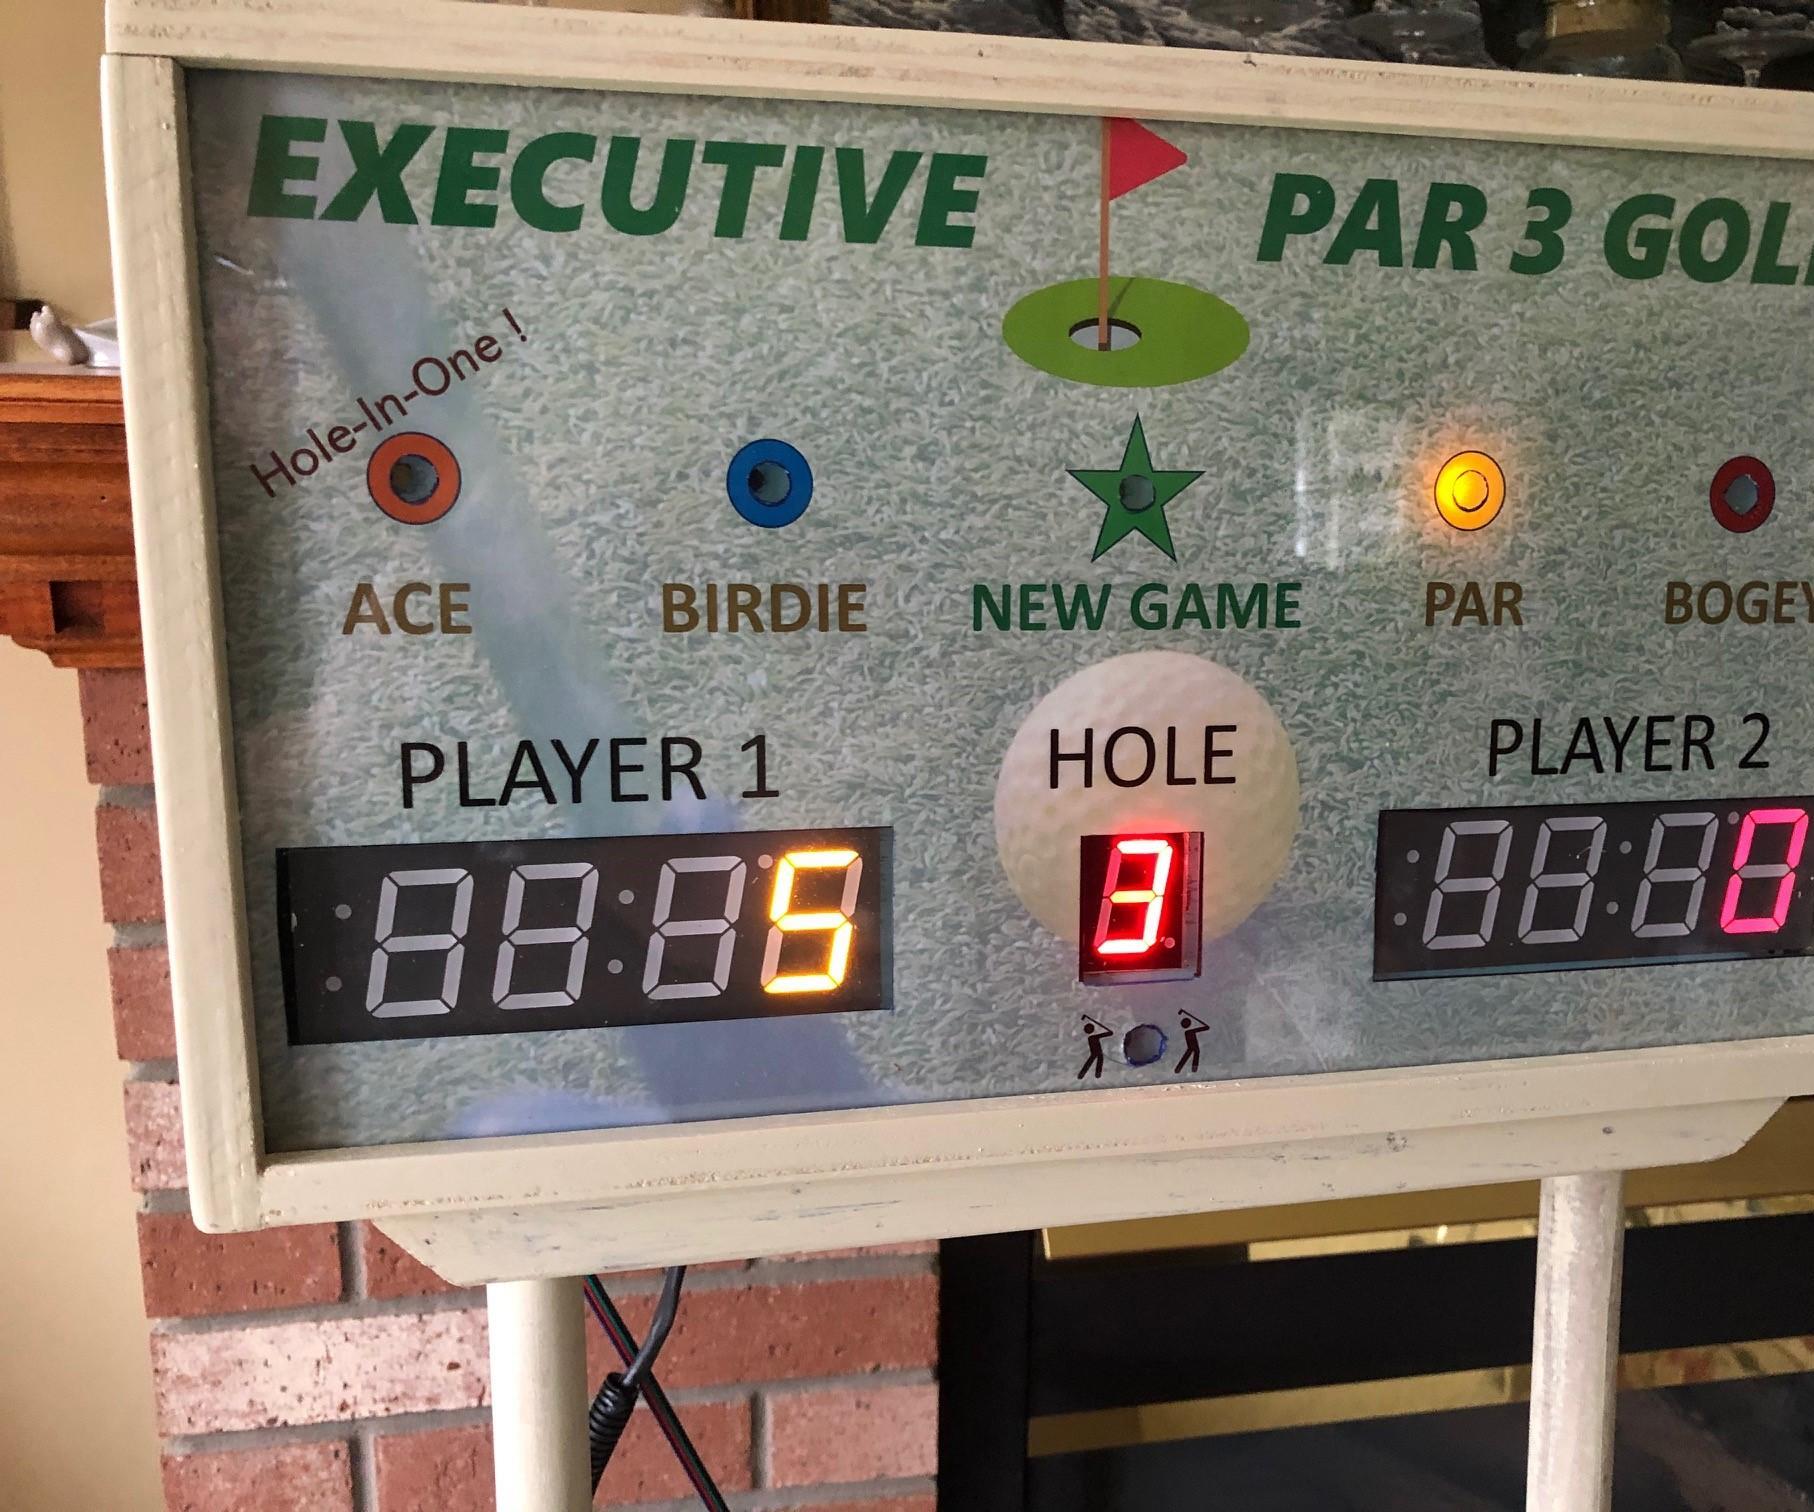 Automatic Scoring for the Executive Par 3 Golf Game